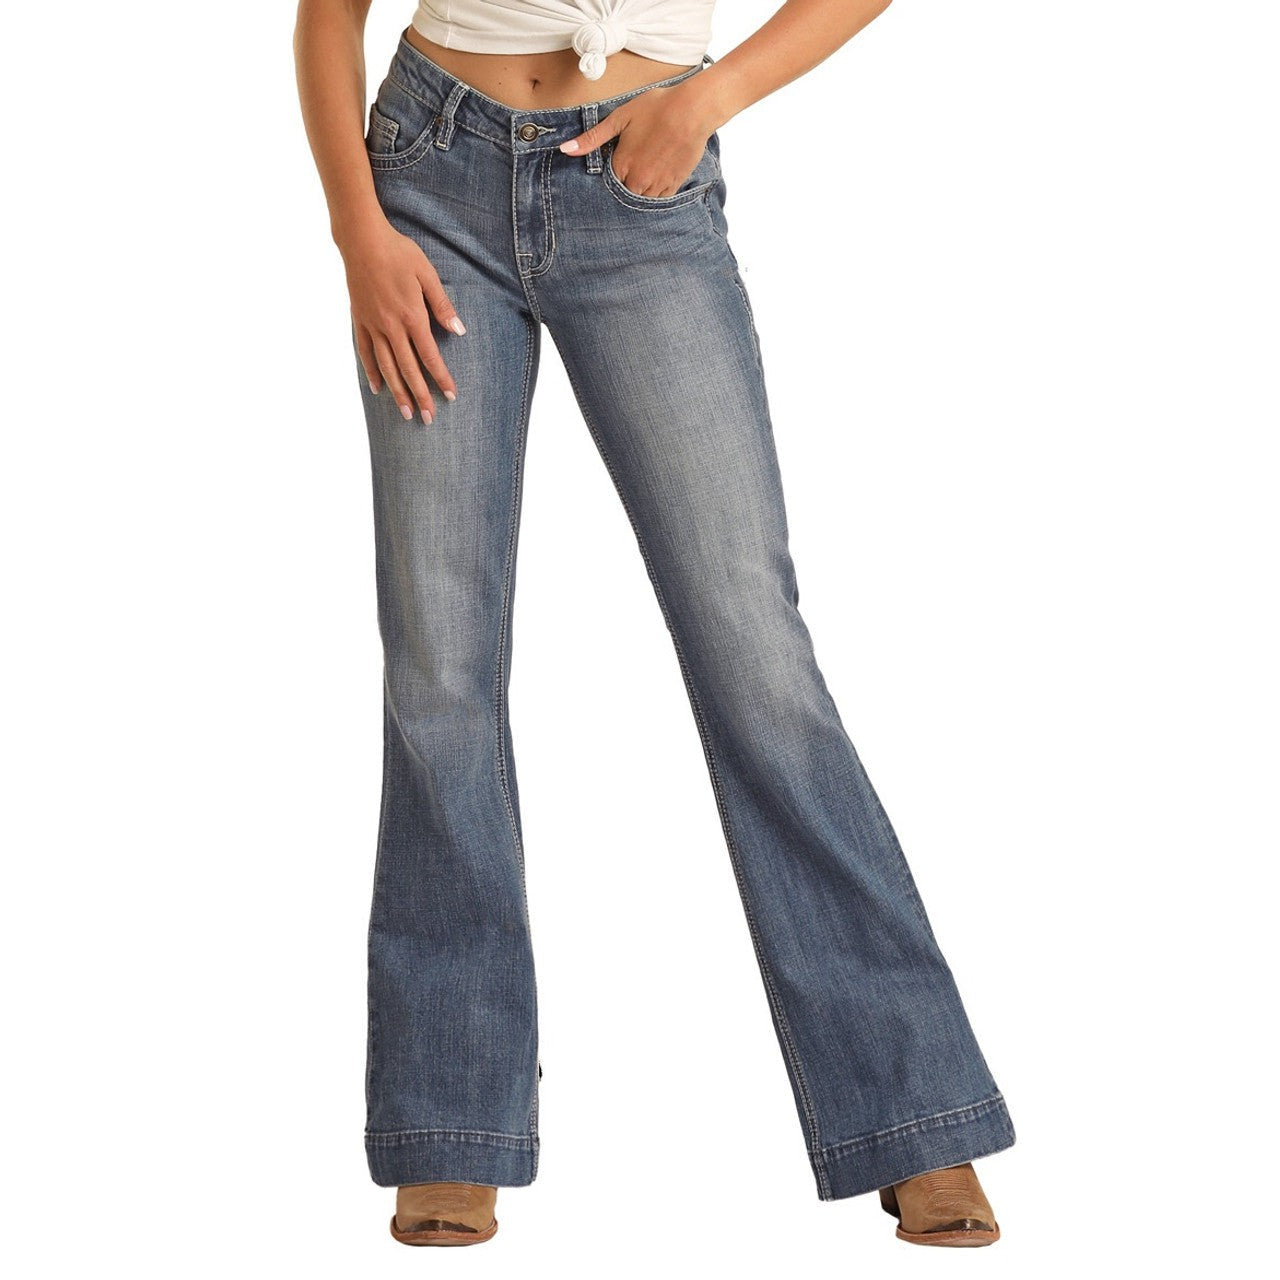 Rock & Roll Women's Mid Rise Relaxed Fit Trouser Jeans - Medium Wash